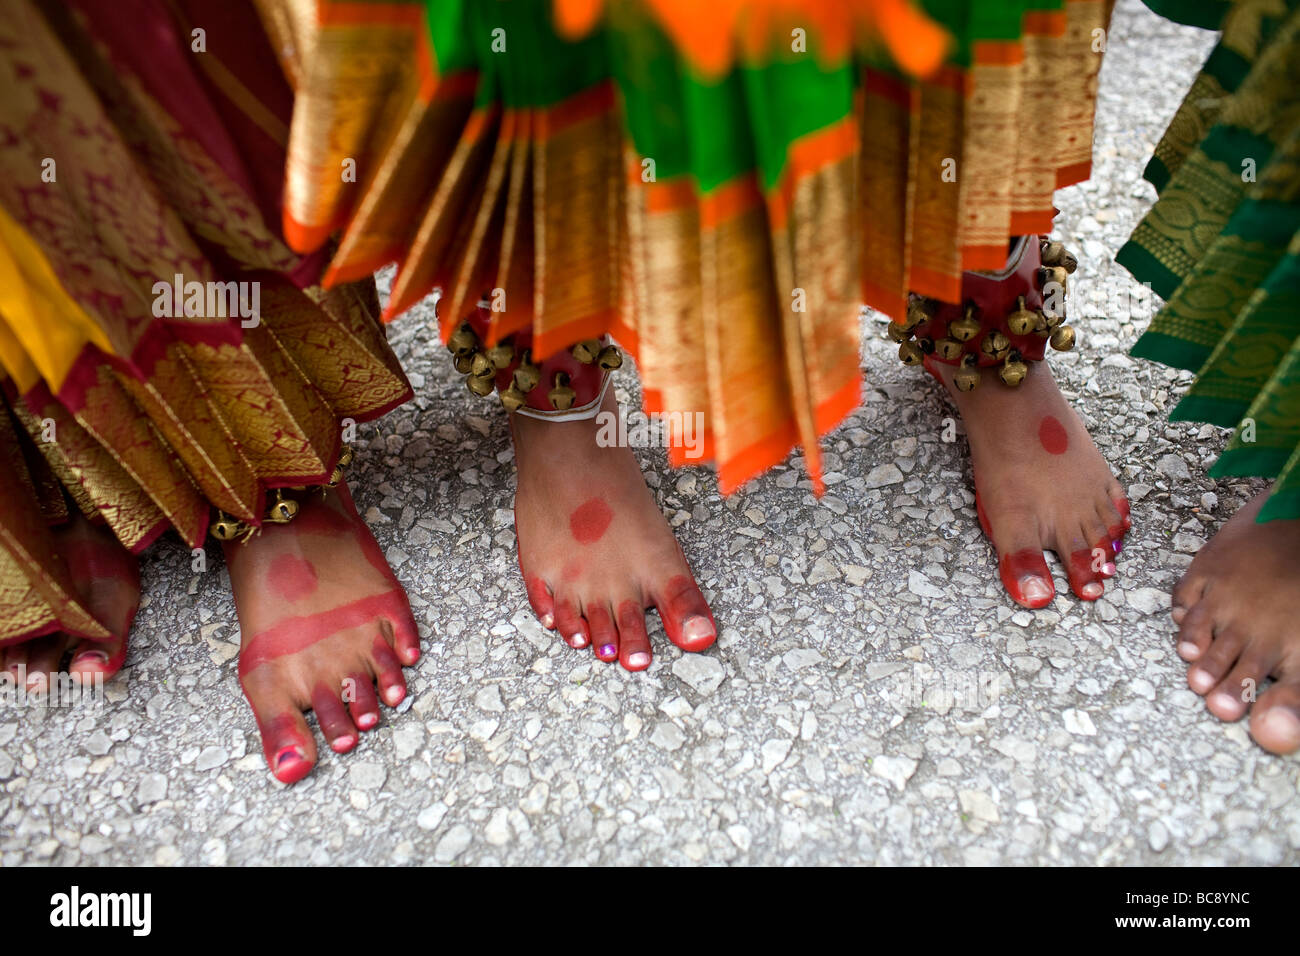 The painted feet of three East Indian or Hindu girls waiting to perform at a festival. Stock Photo